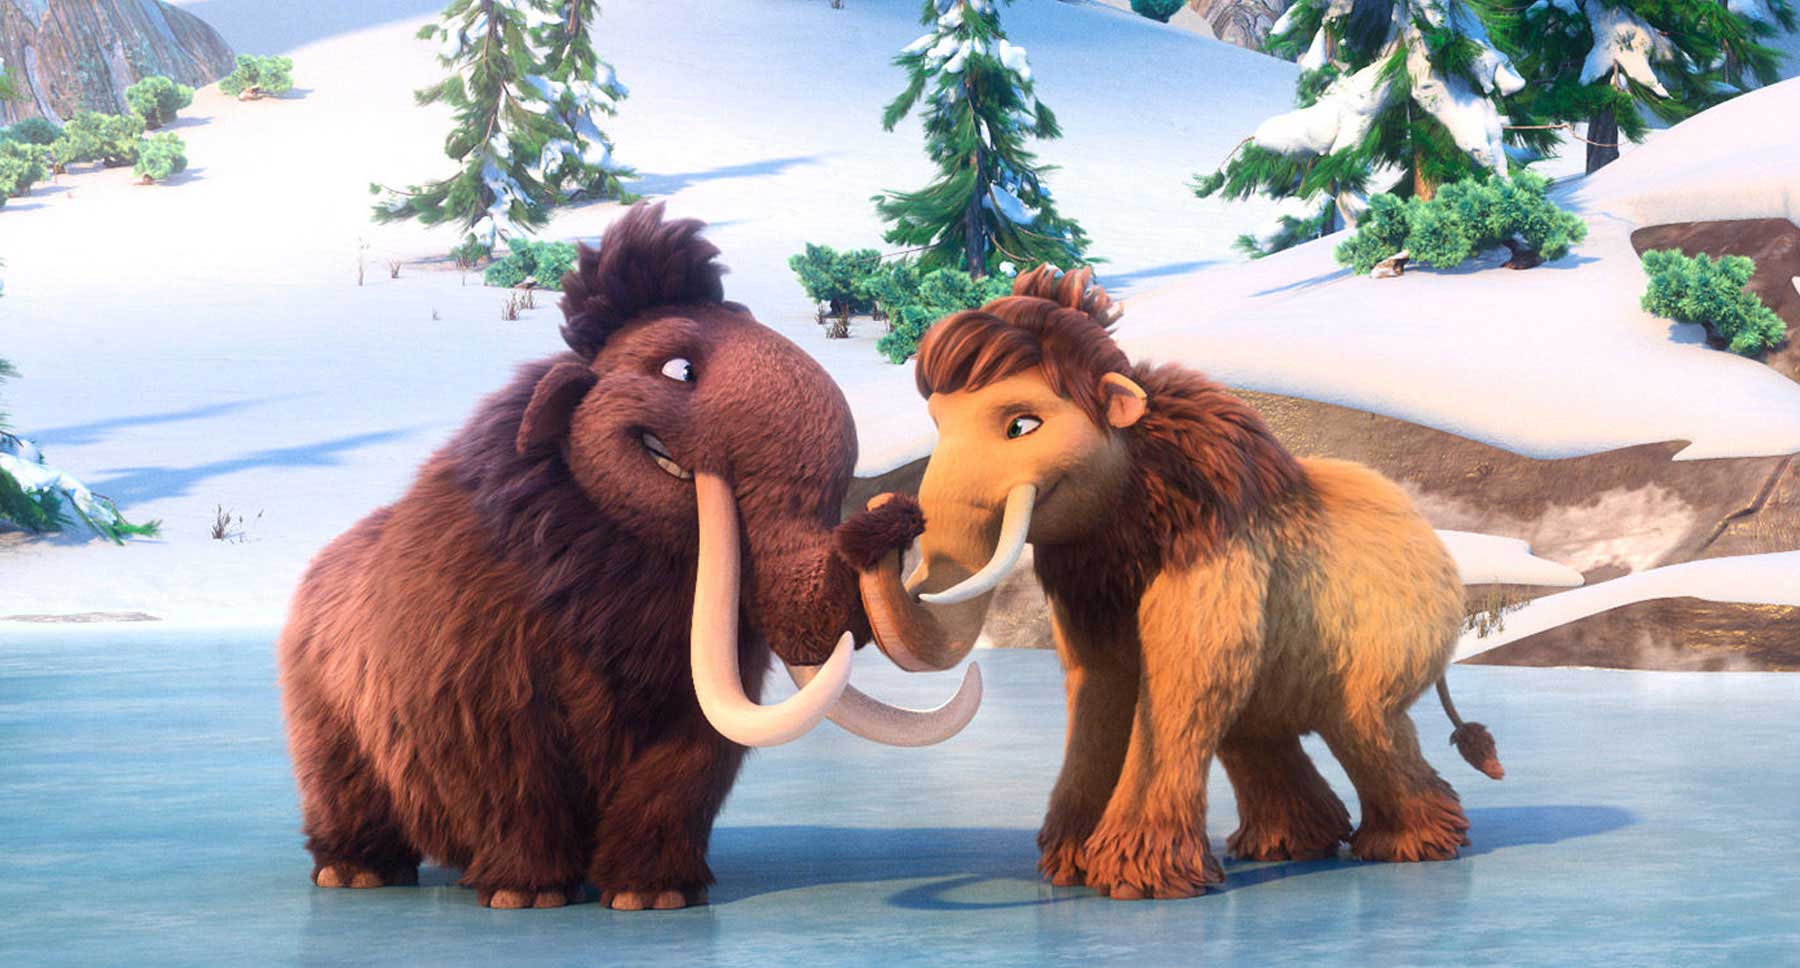 ice age 5 movie download